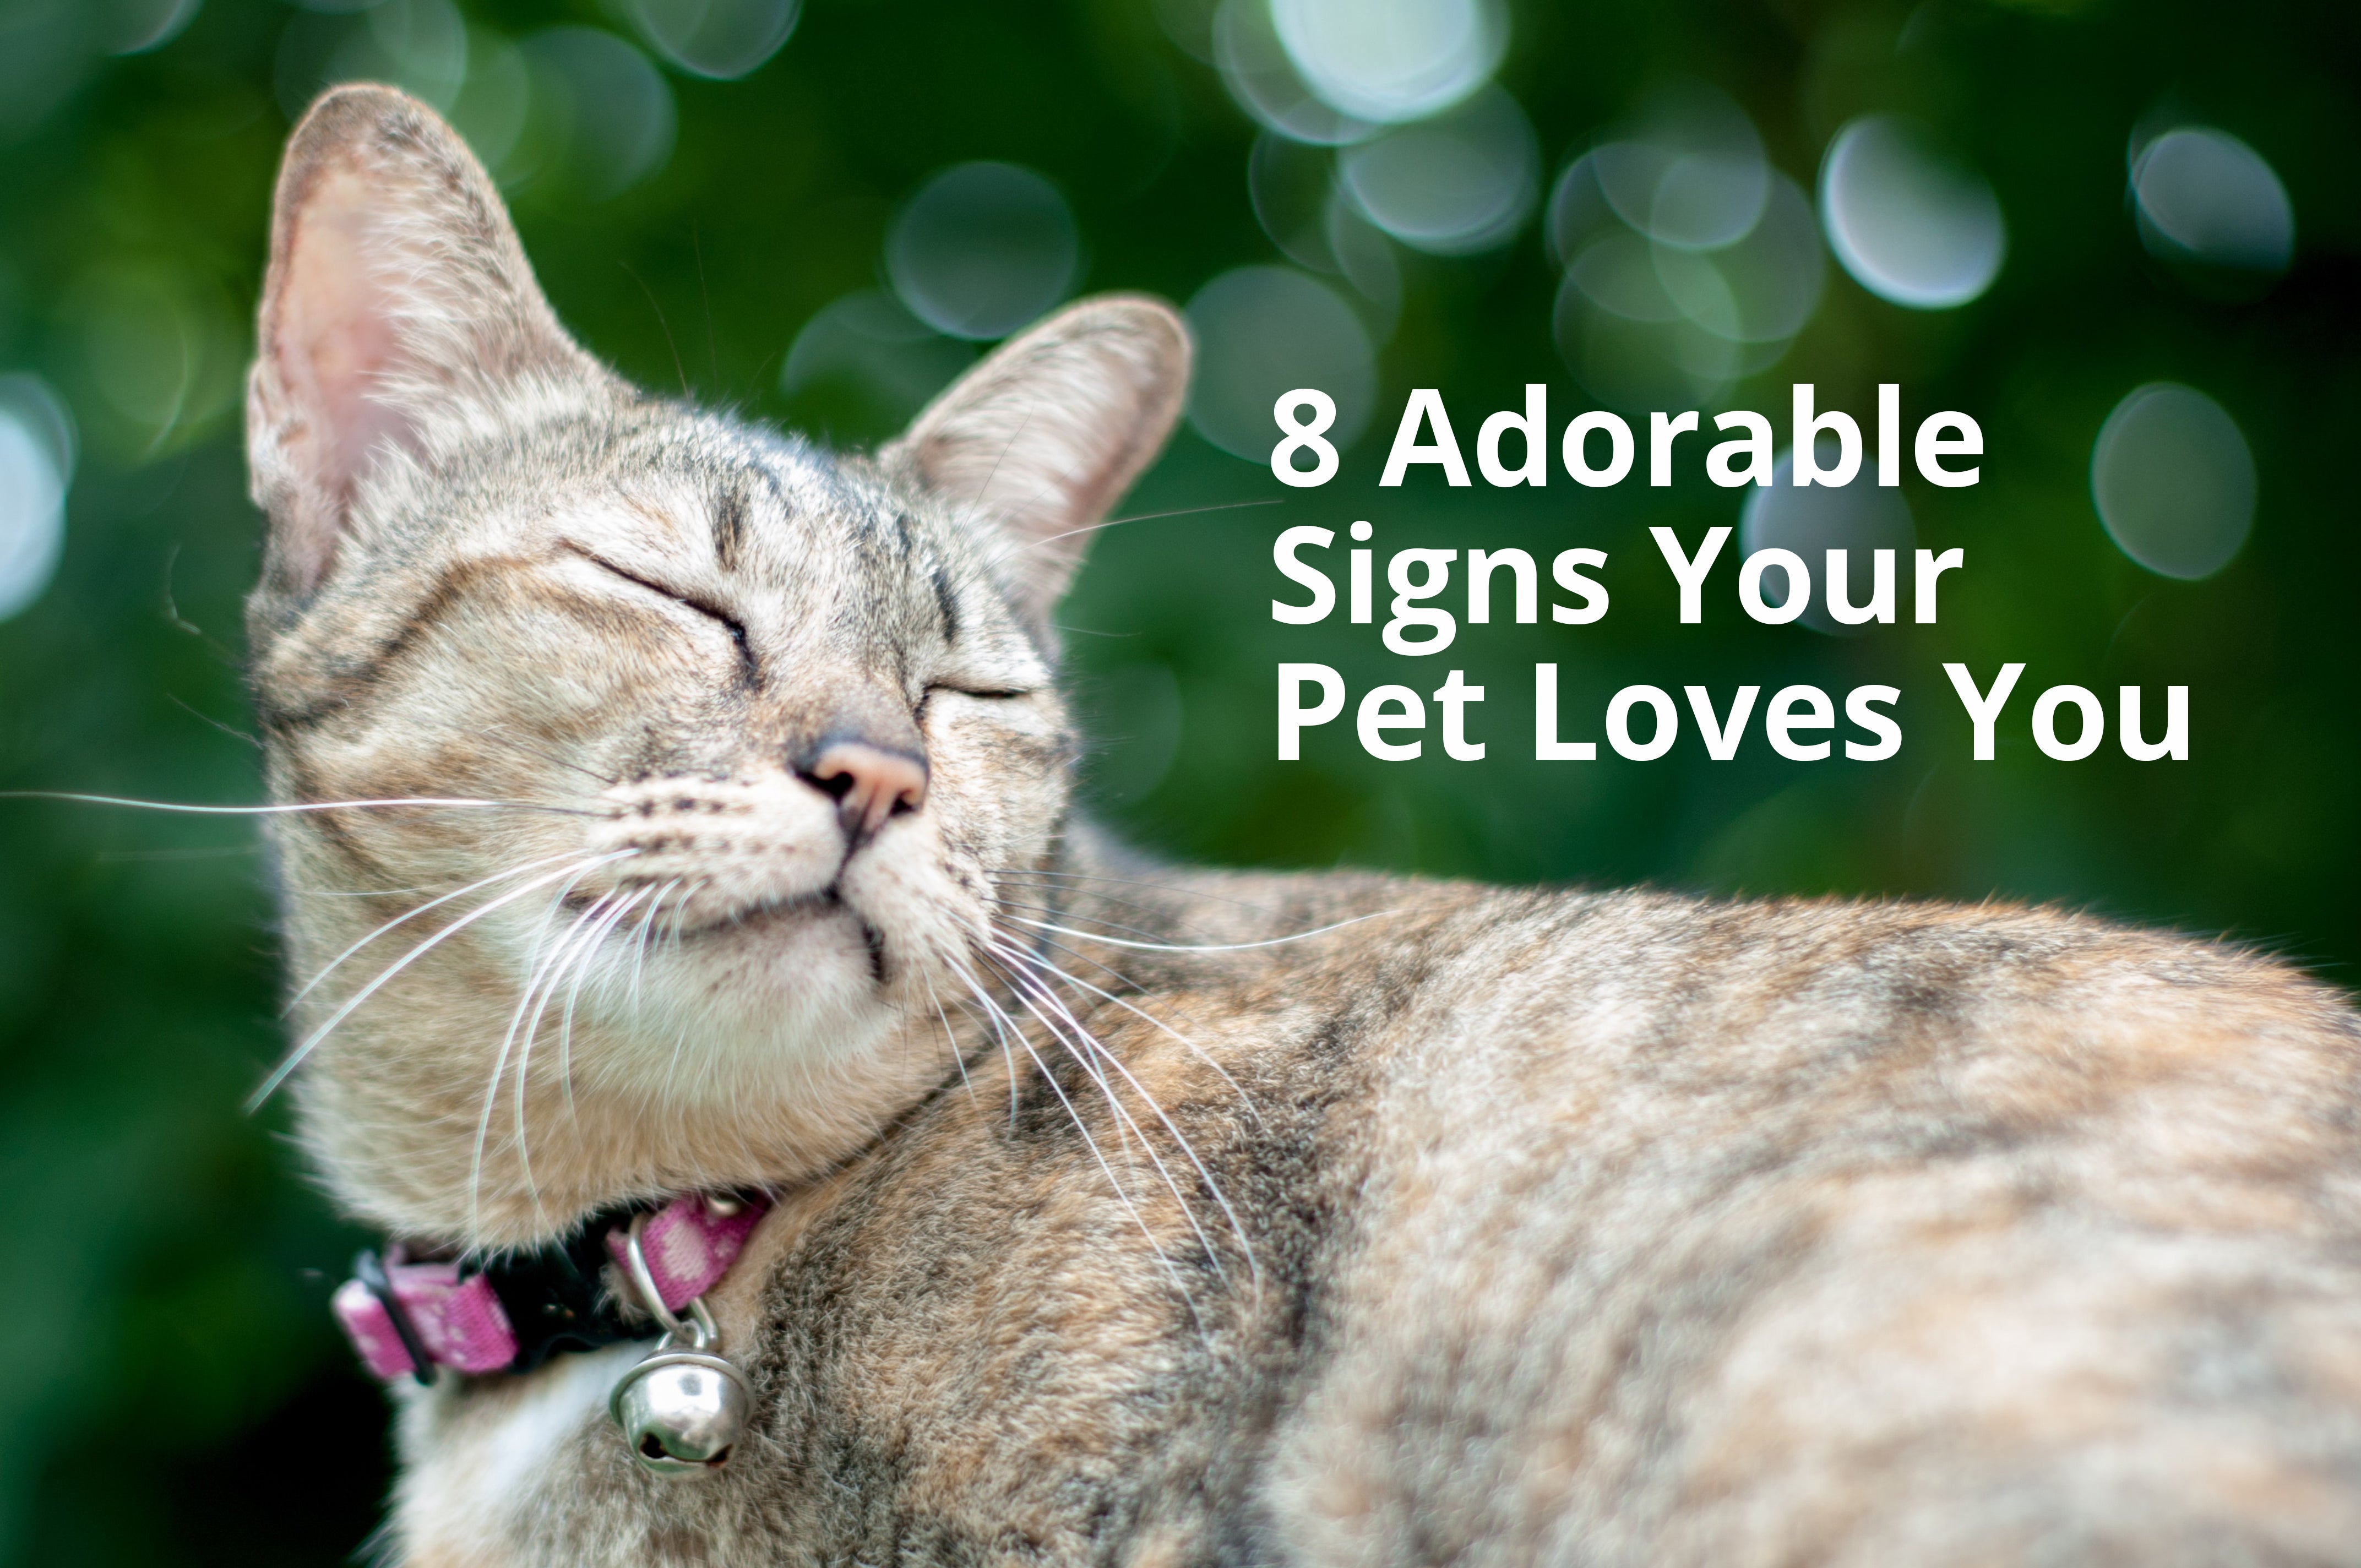 8 Adorable Signs Your Pet Loves You